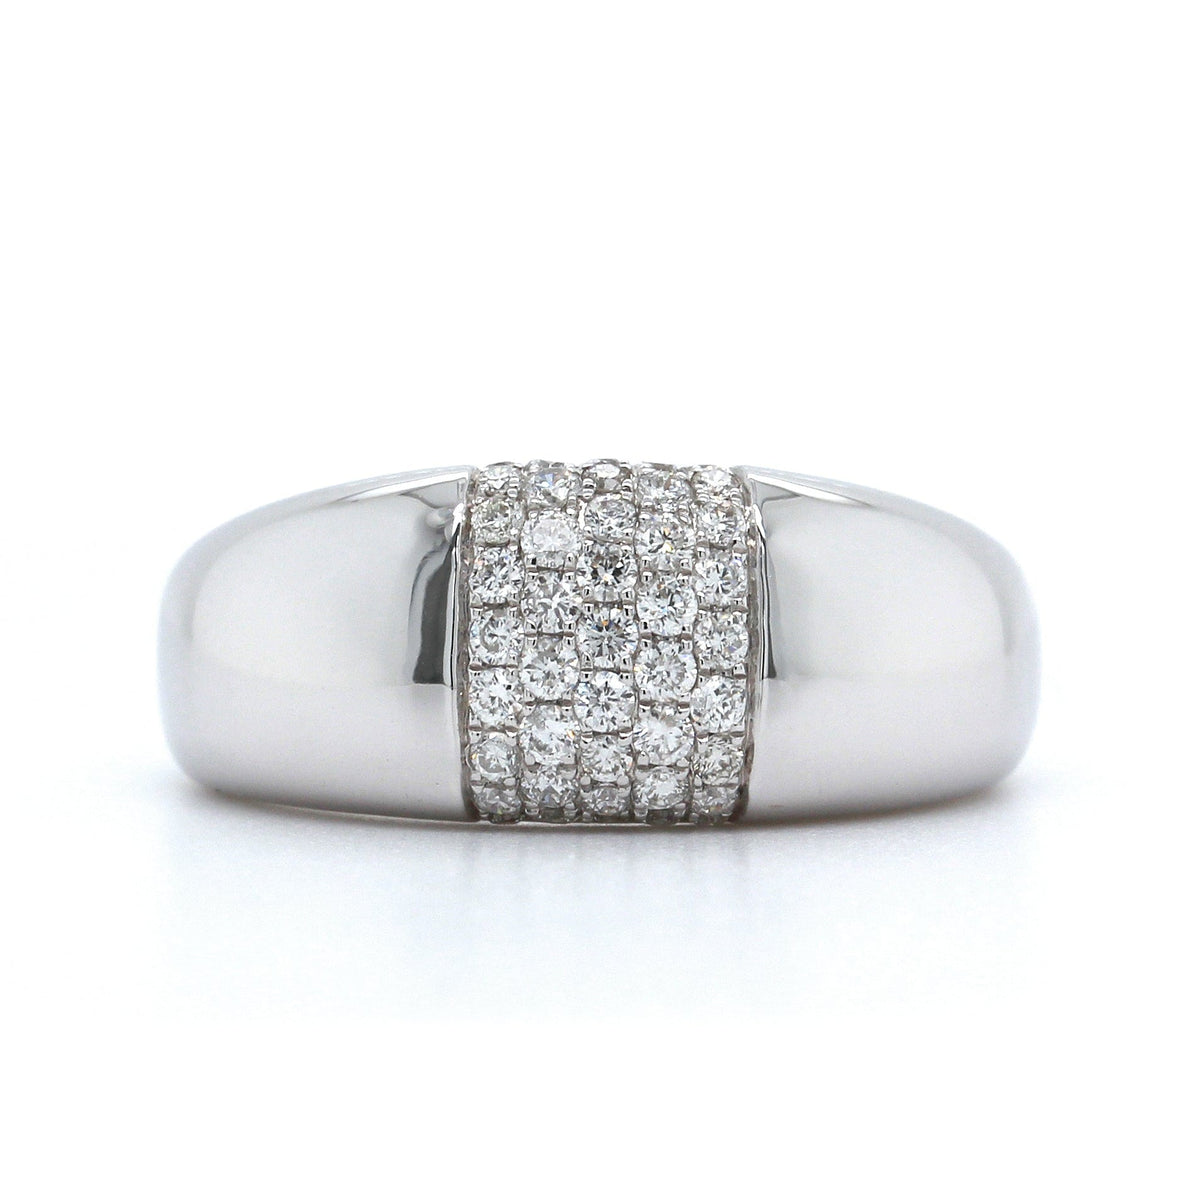 18K White Gold Pave Center Dome Ring